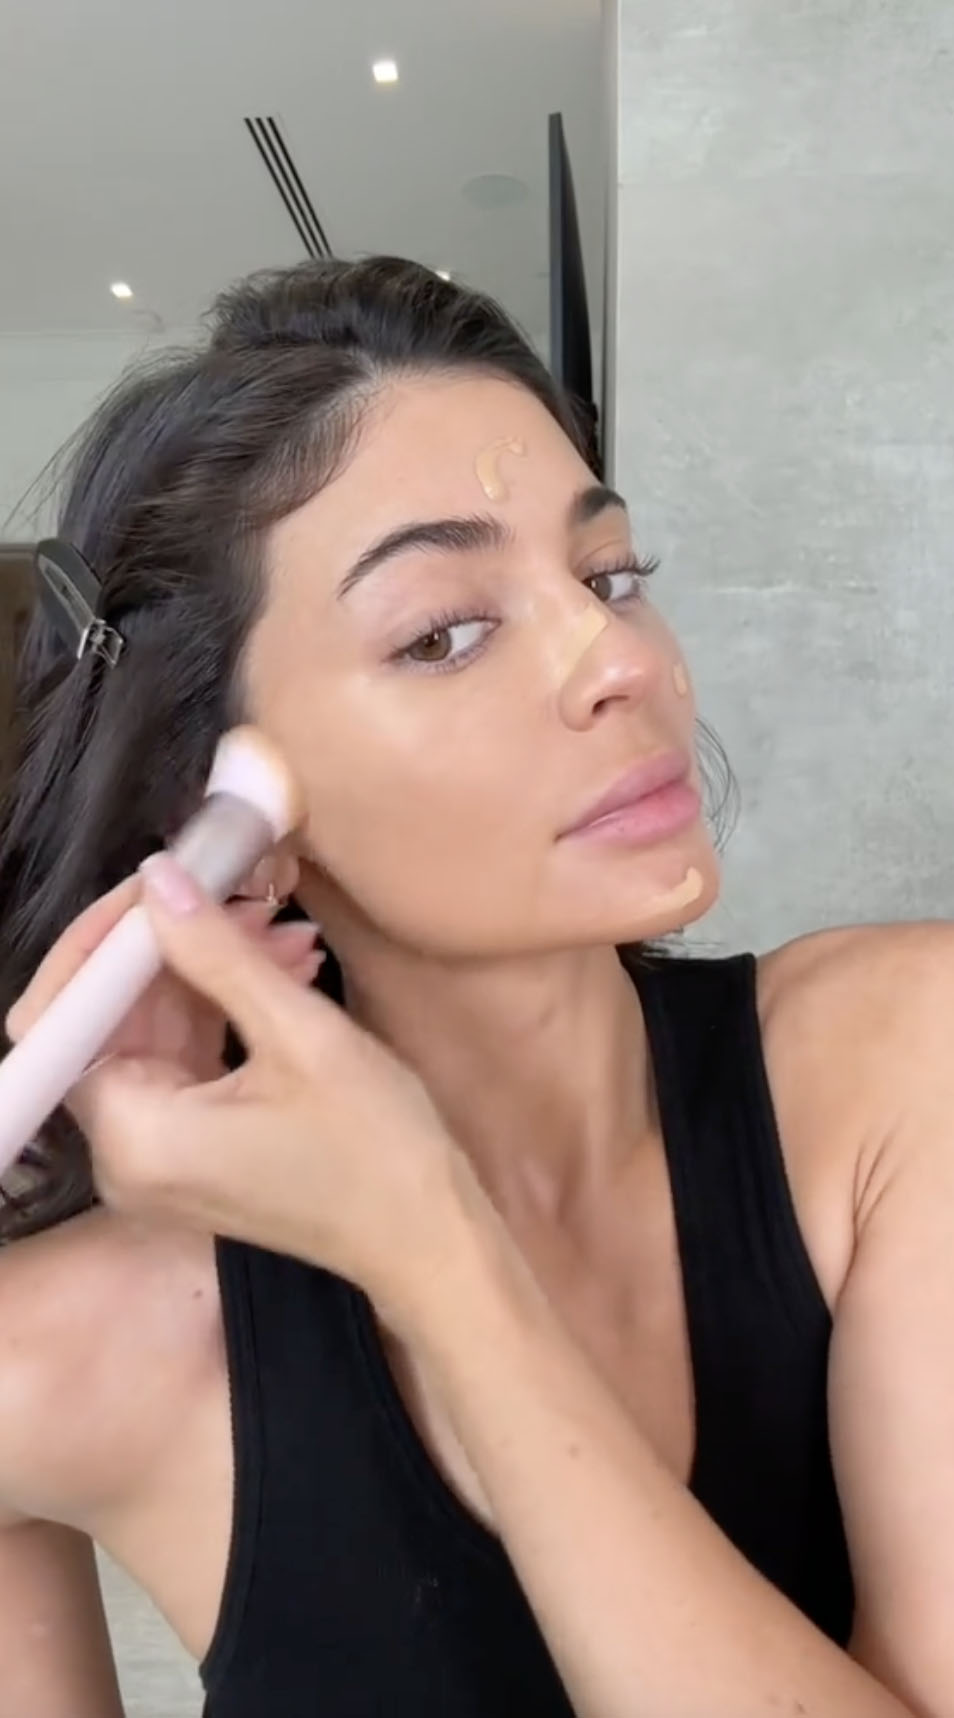 Kylie dissolved her lip filler for a more natural look